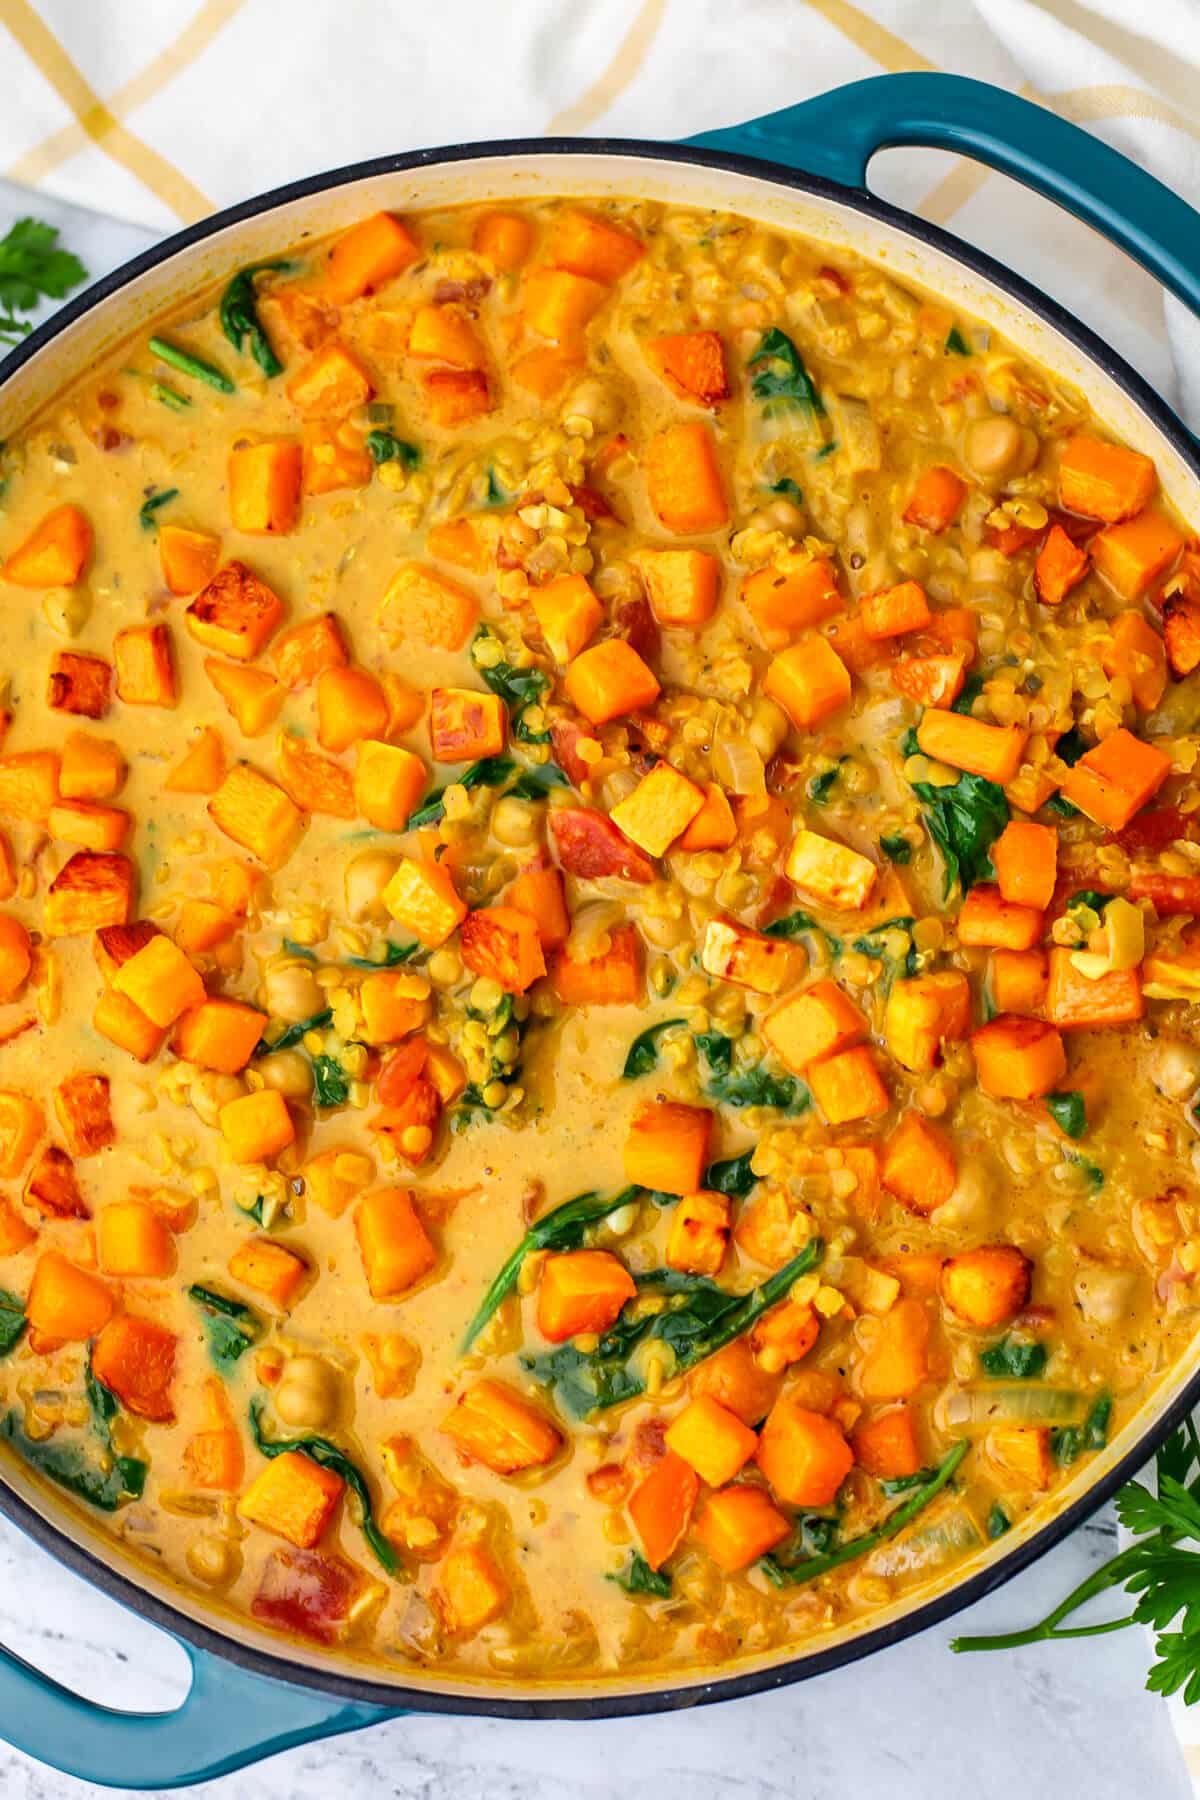 A top view of a pot of roasted squash curry with red lentils, chickpeas and spinach.